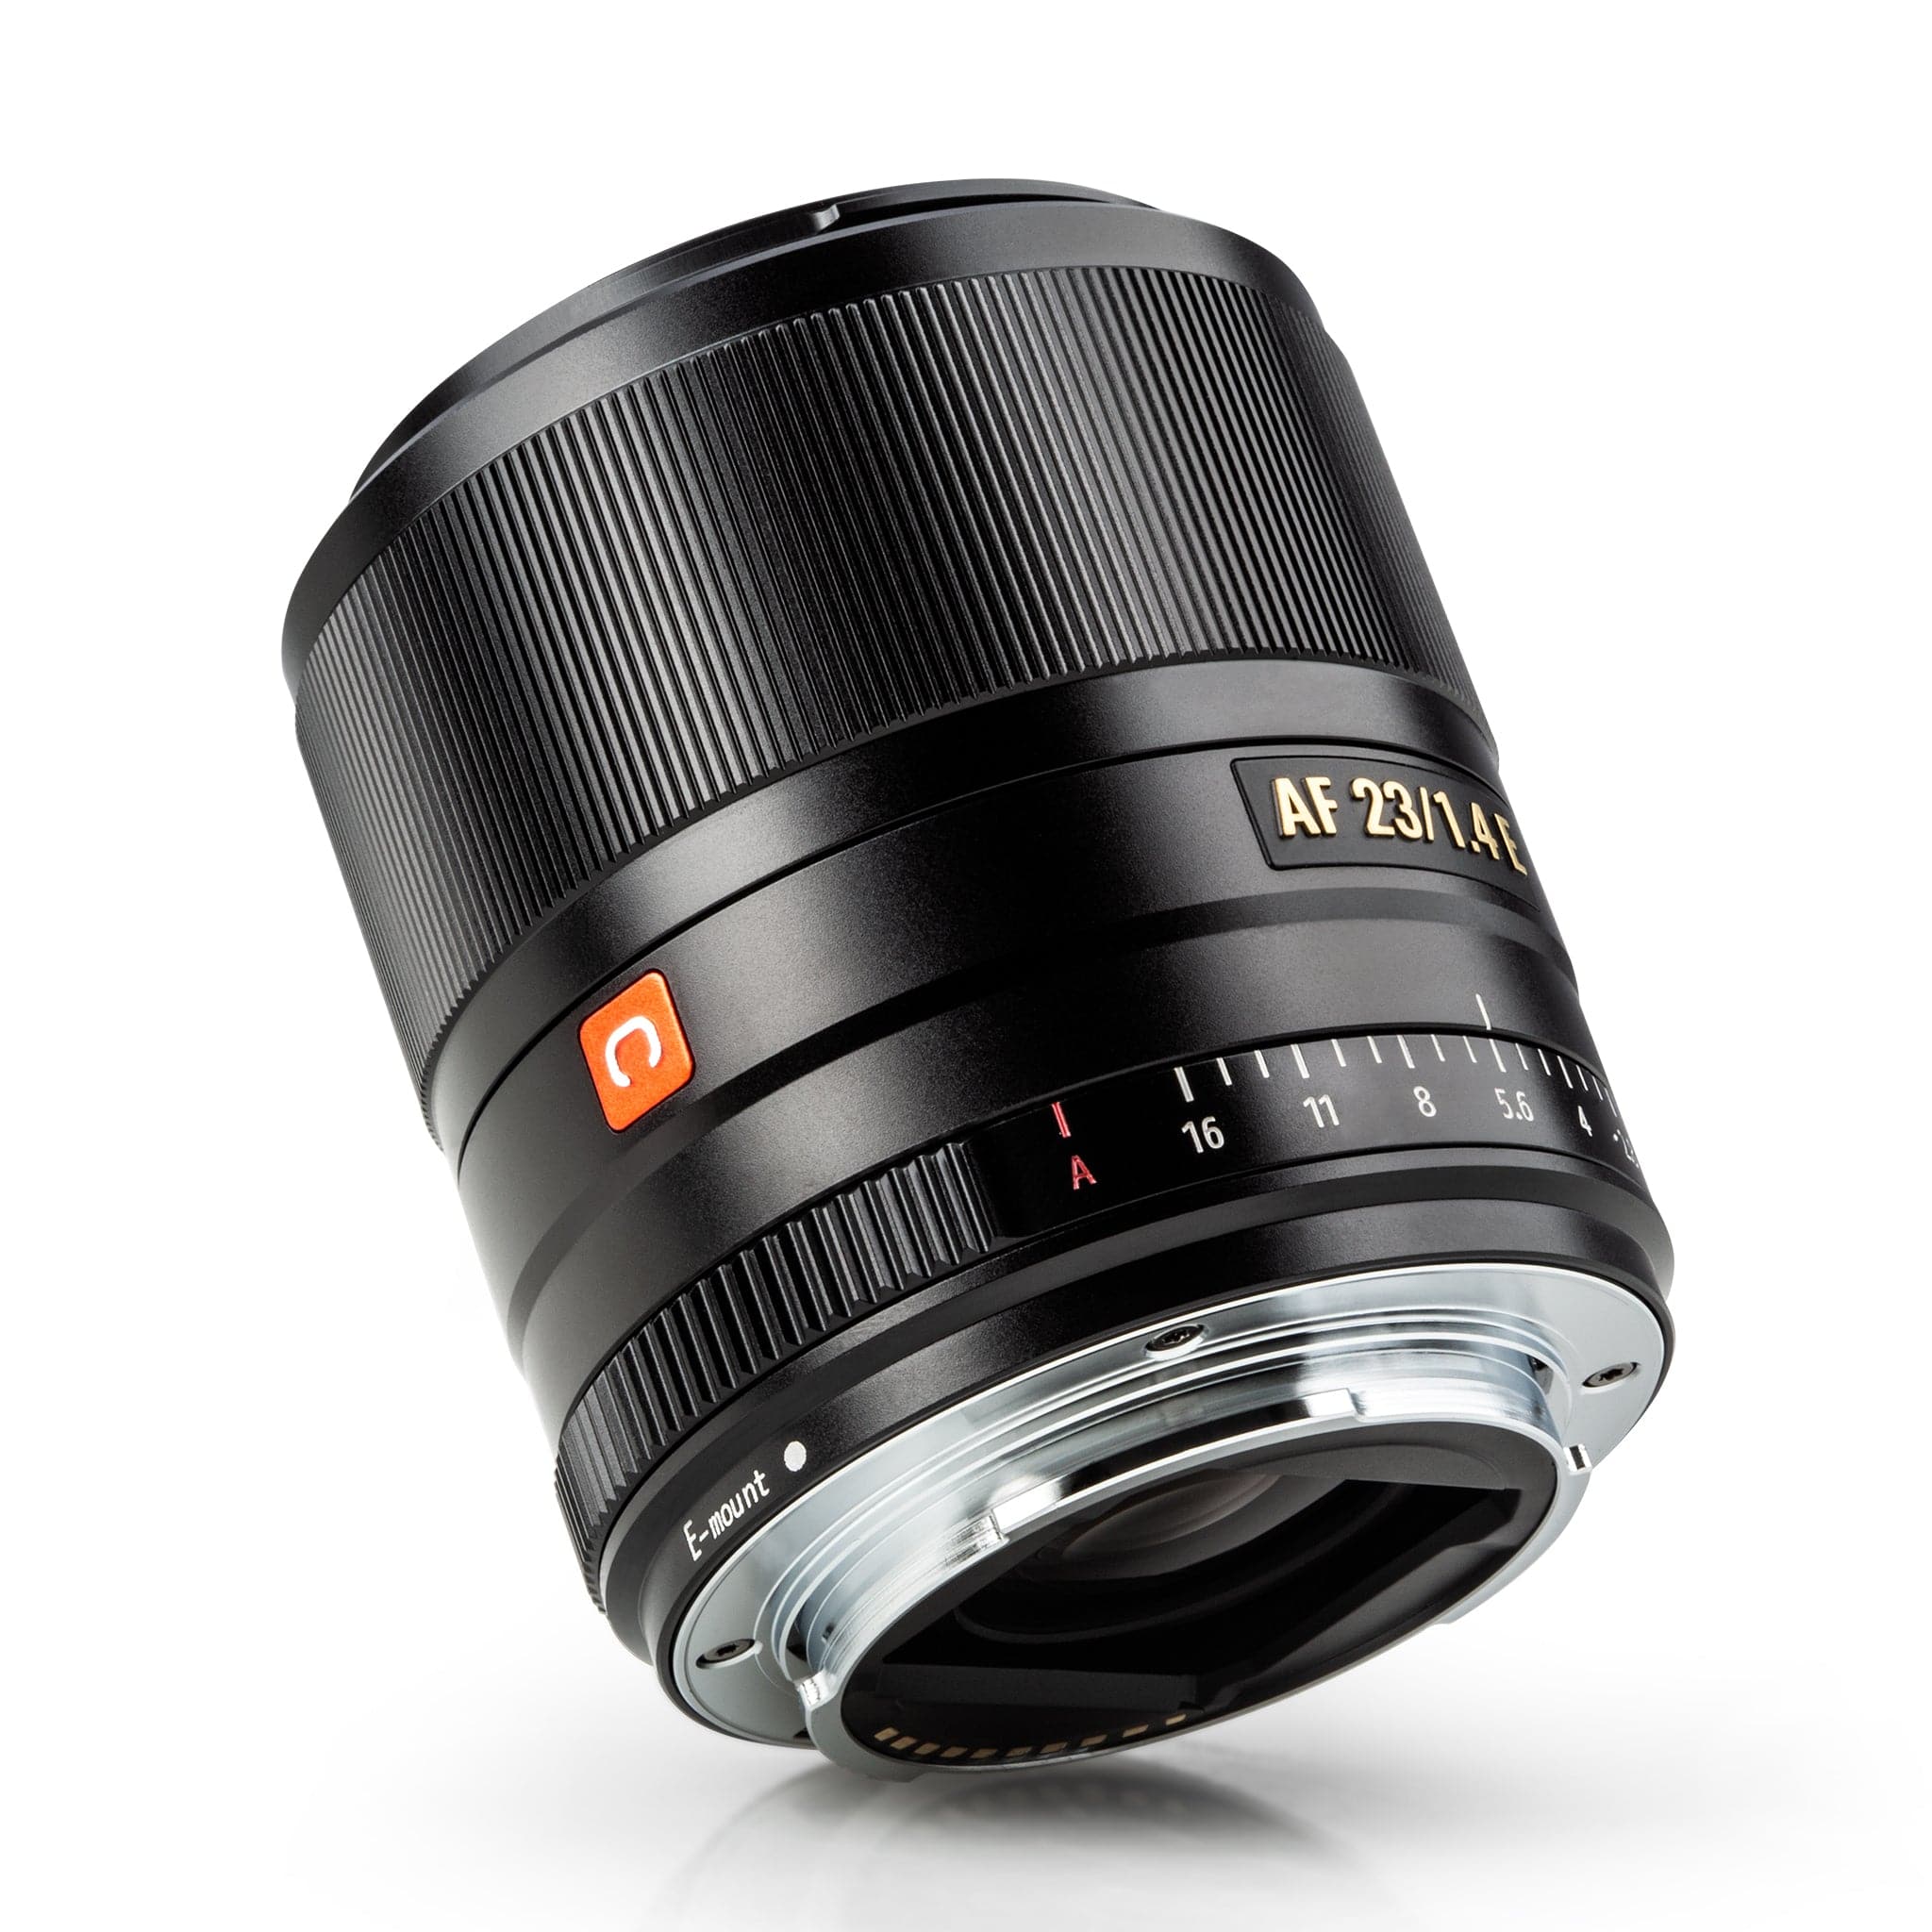 NEW Viltrox 23mm f1.4 E Auto Focus APS-C Prime Lens for Sony E-mount Camera with Large Aperture